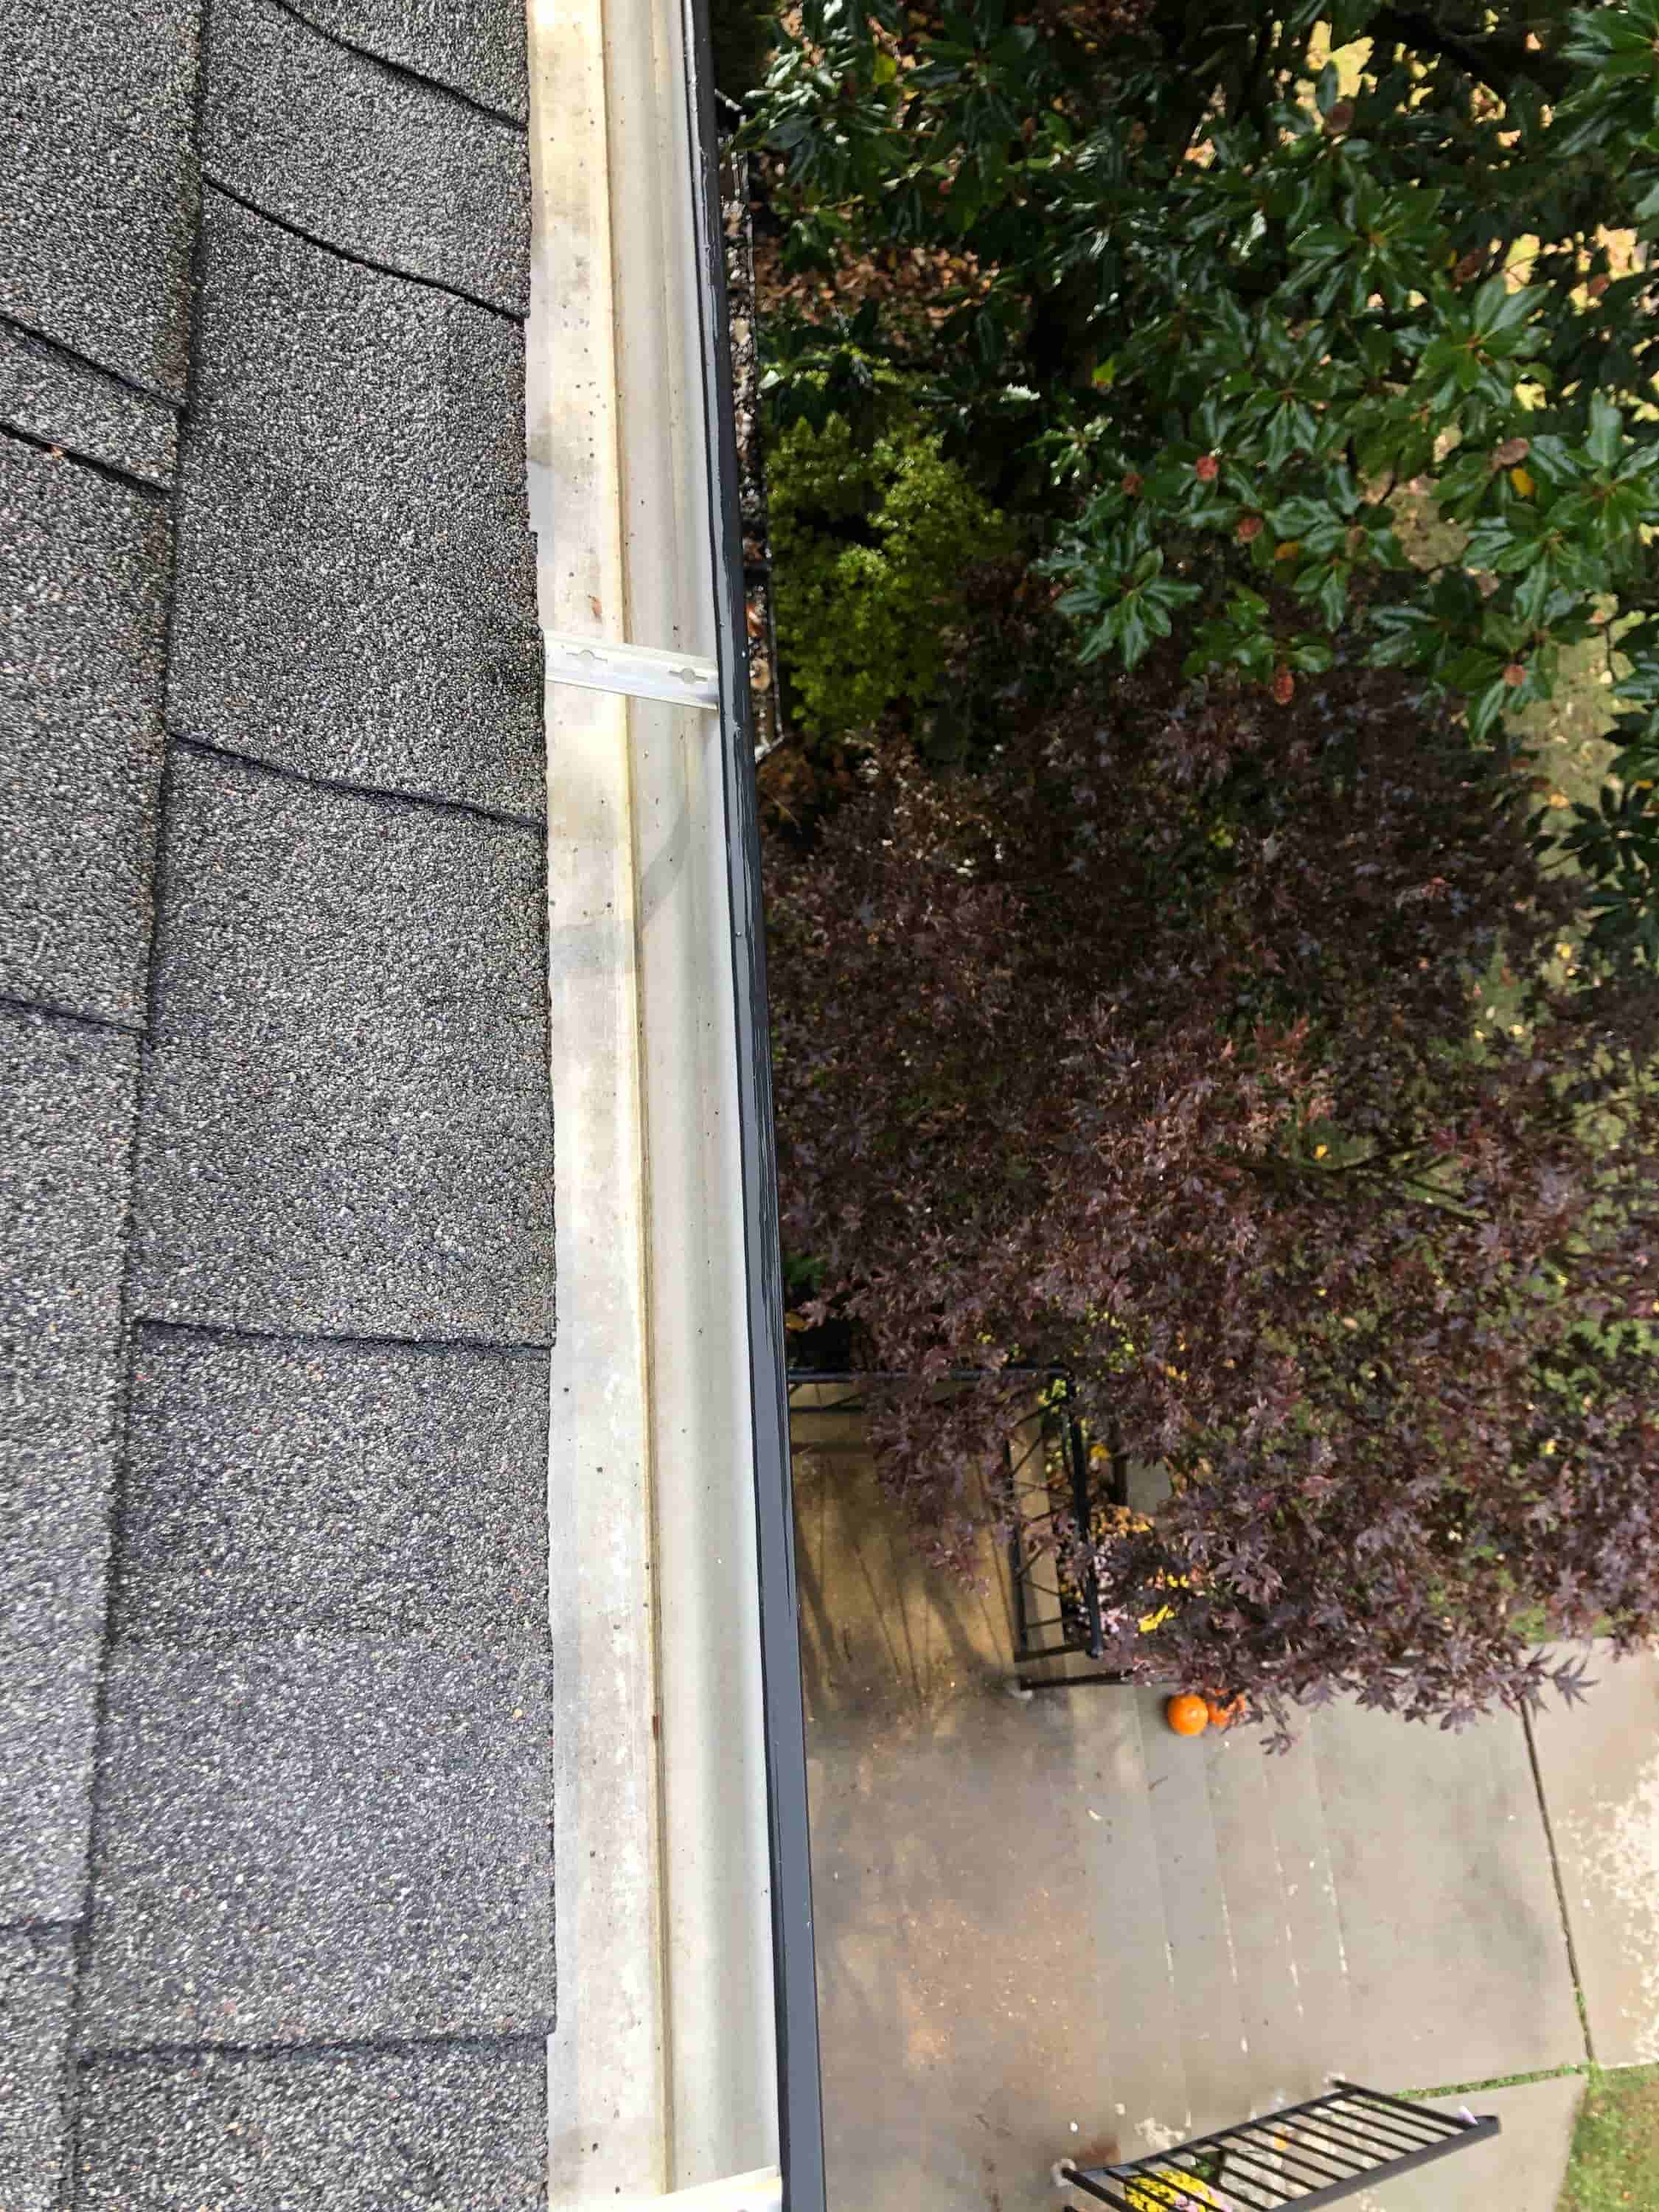 cleaning a gutter